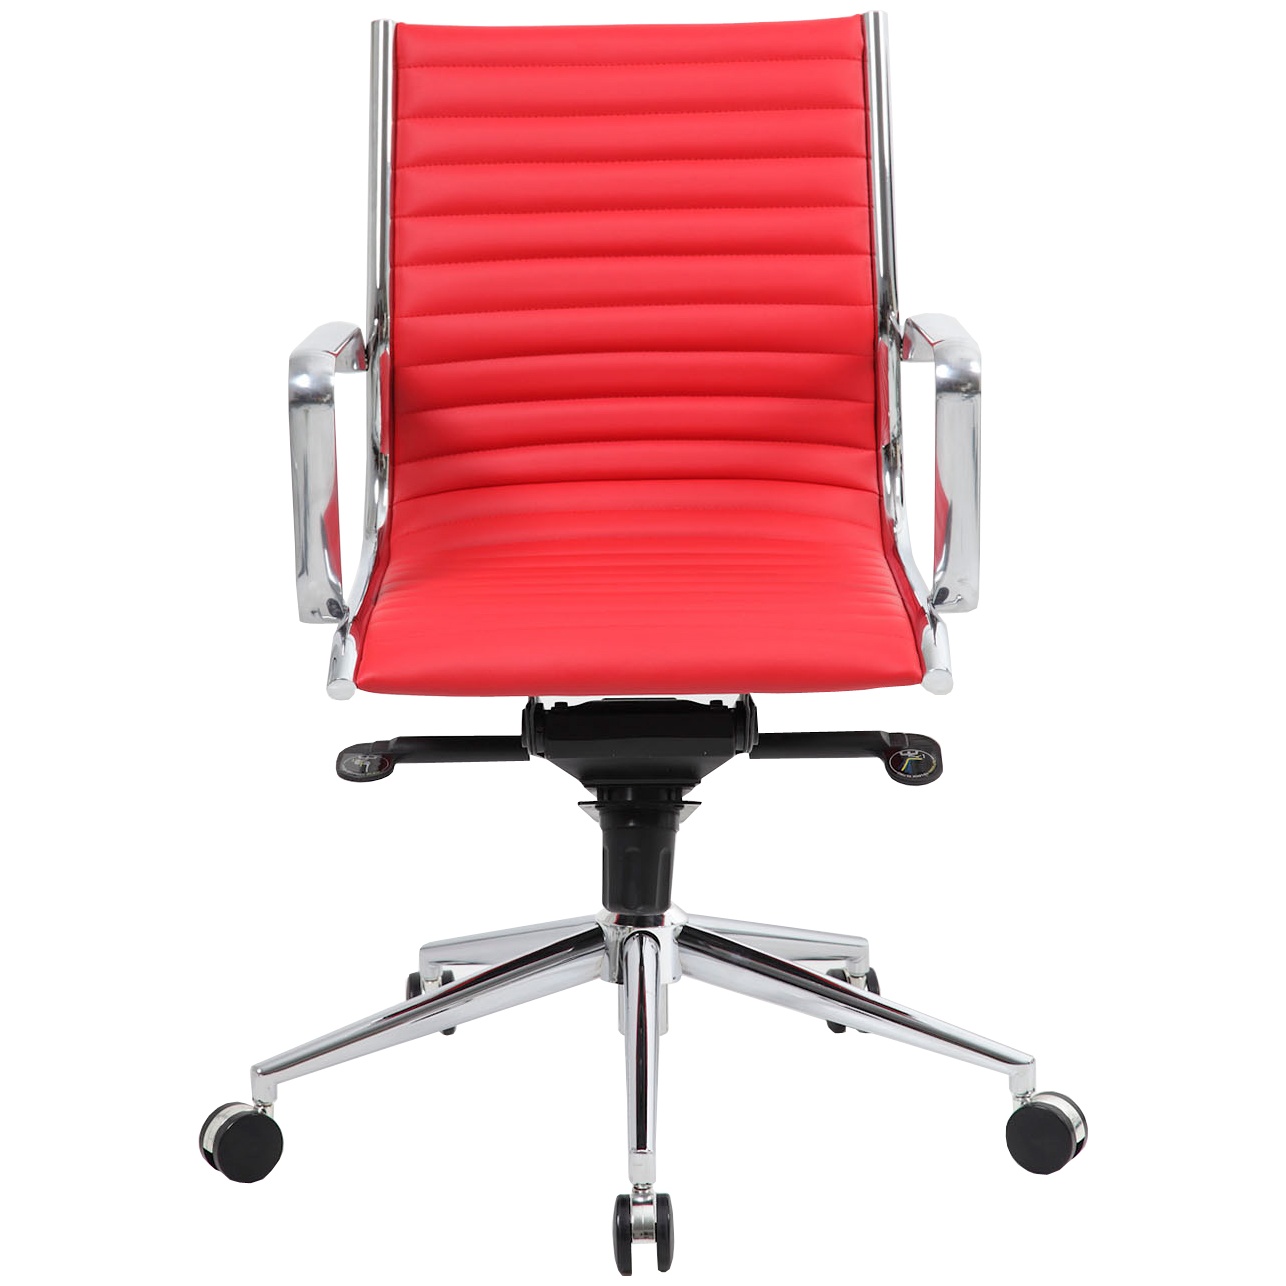 Abbey Medium Back Red Leather Office Chair Executive